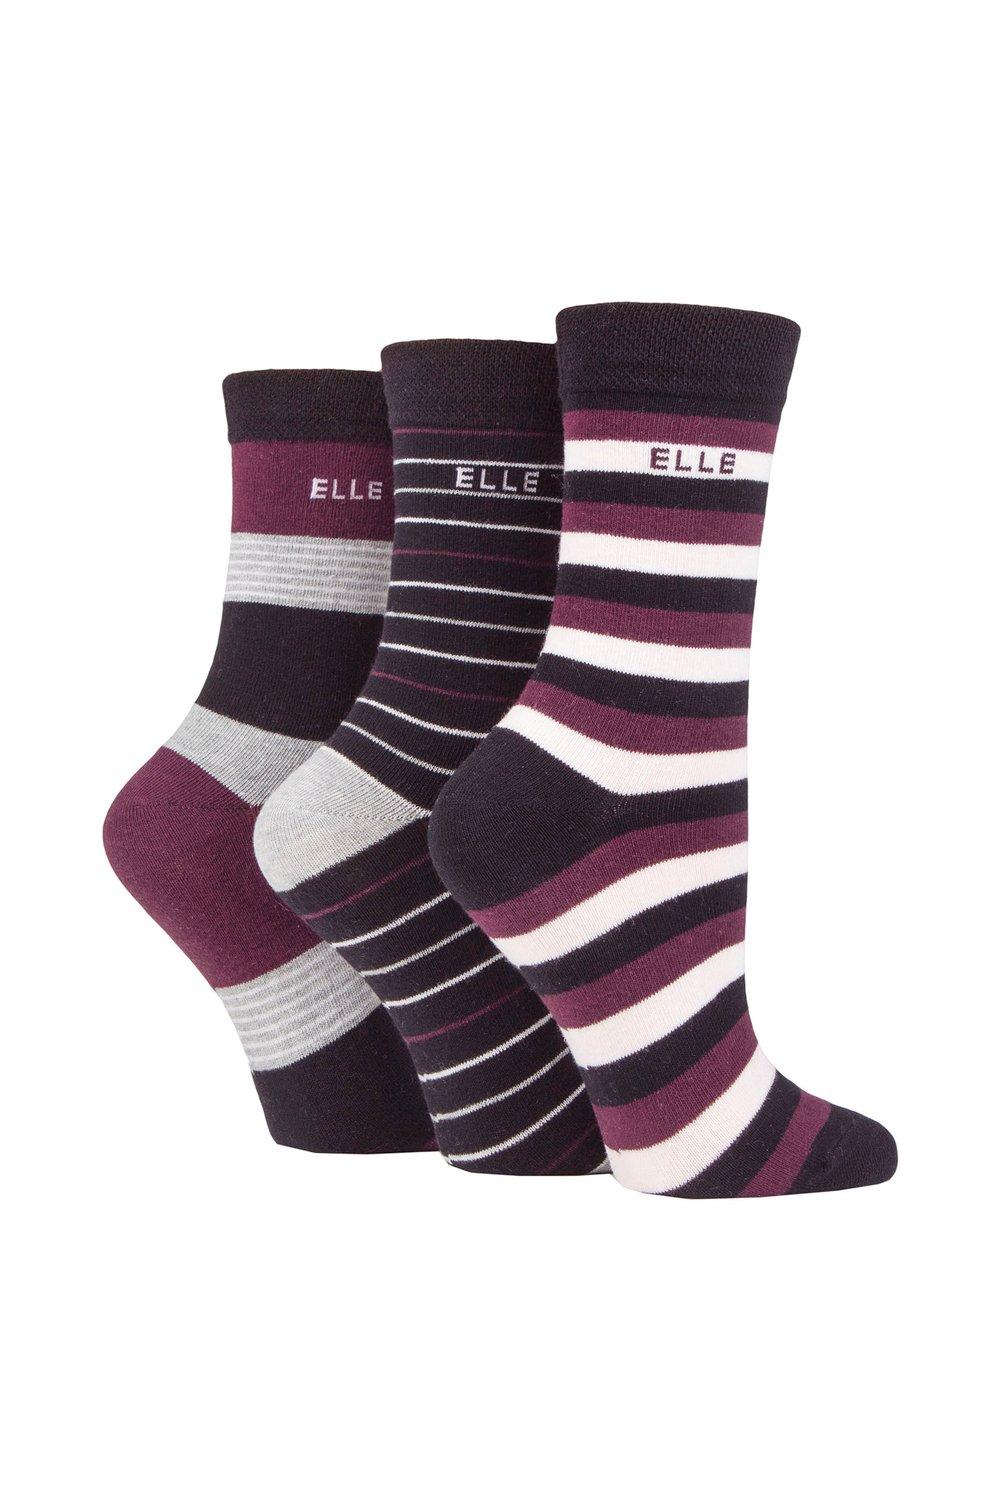 3 Pair Plain, Striped and Patterned Cotton Socks with Hand Linked Toes